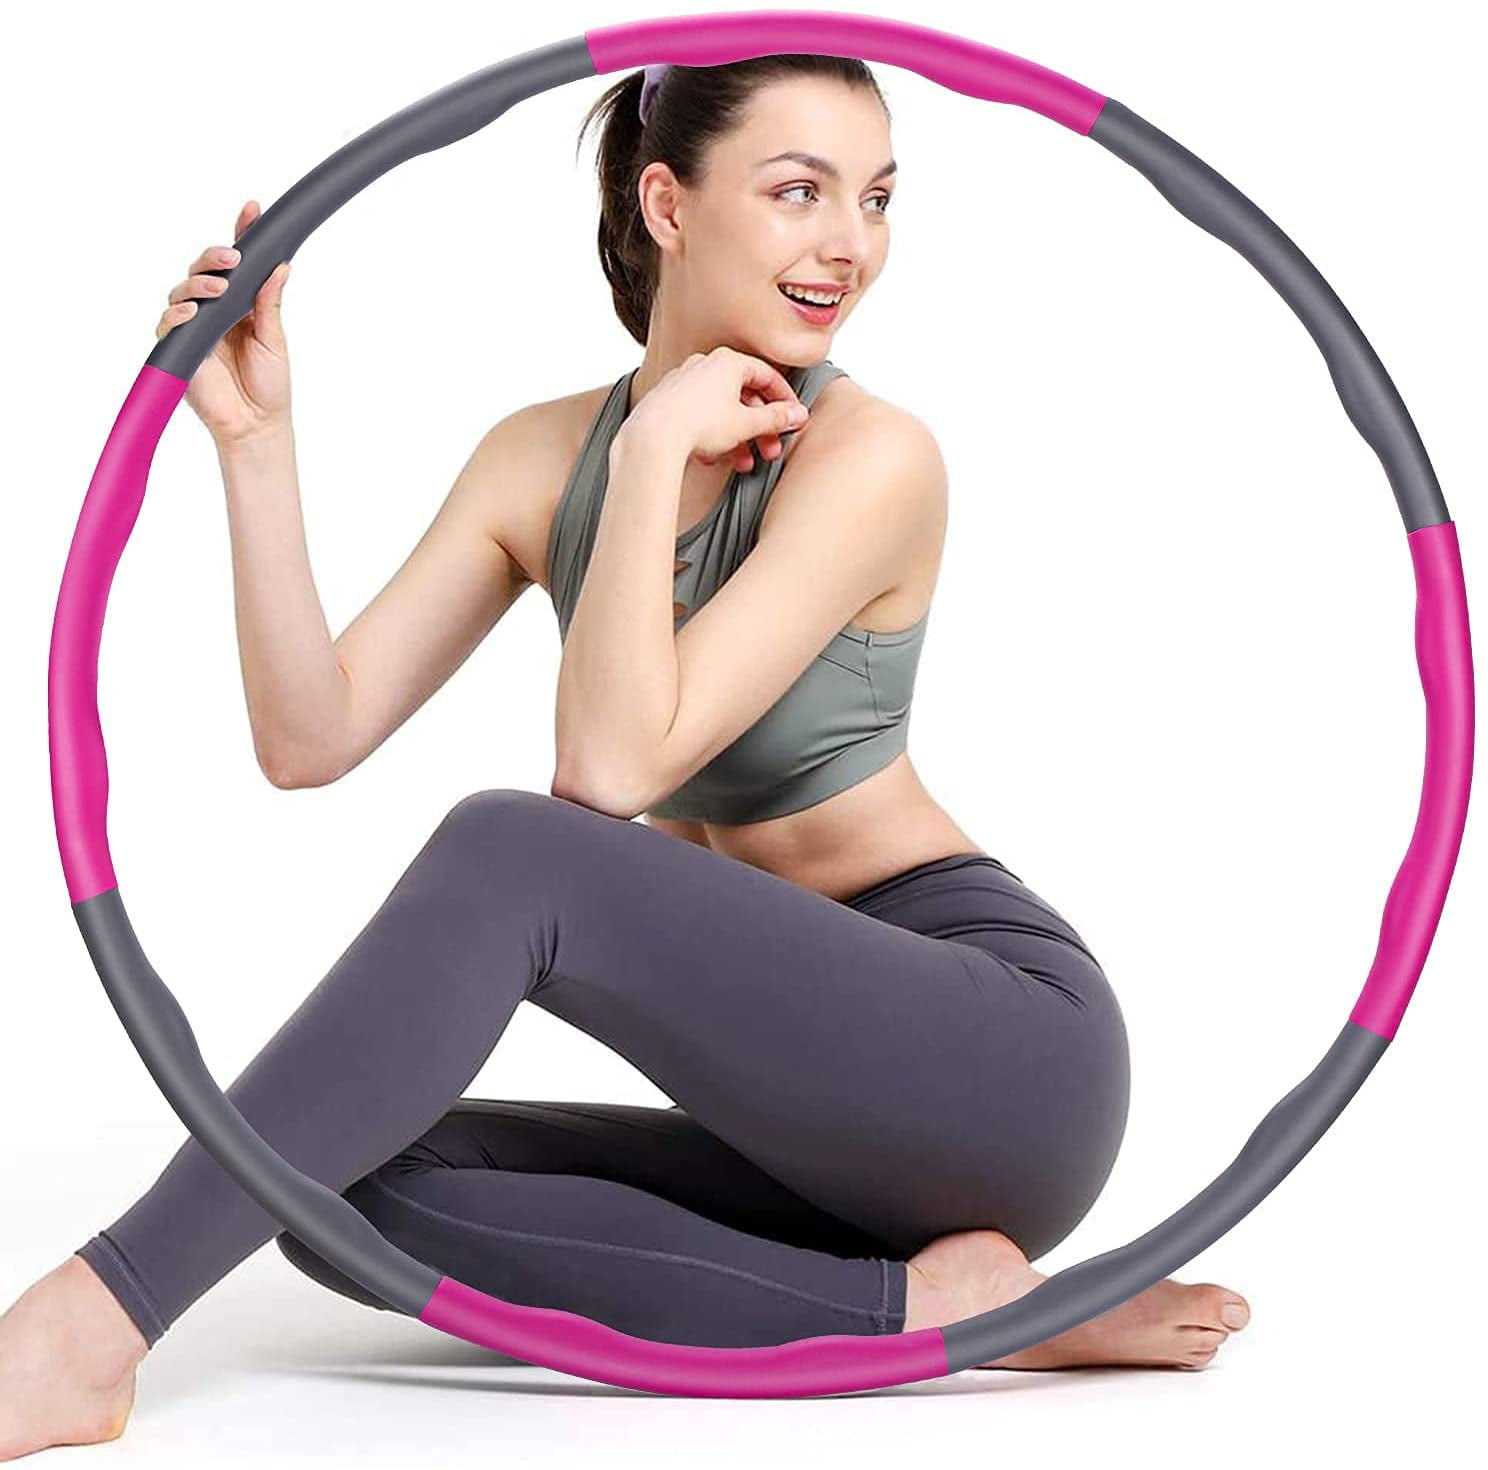 HULA HOOP PROFESSIONAL WEIGHTED MAGNETIC FITNESS EXERCISE MASSAGER WORKOUT ABS